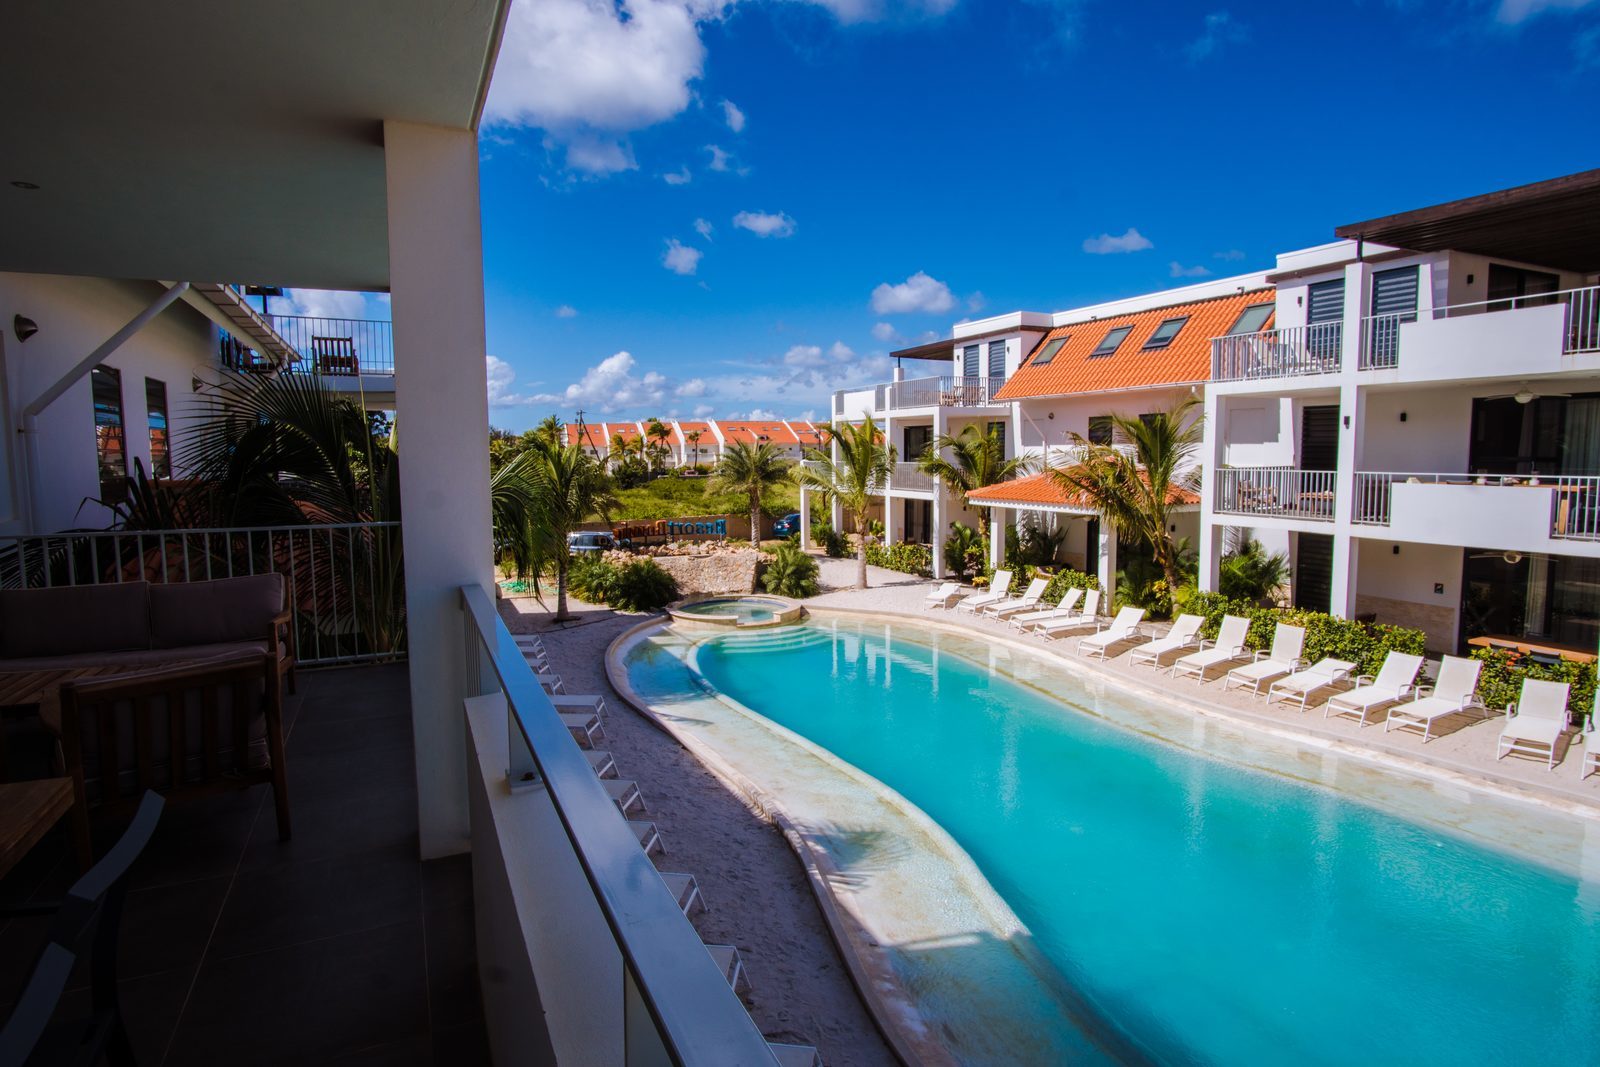 Every one of Resort Bonaire's apartments has a terrace, from which you have a view of the swimming pool.